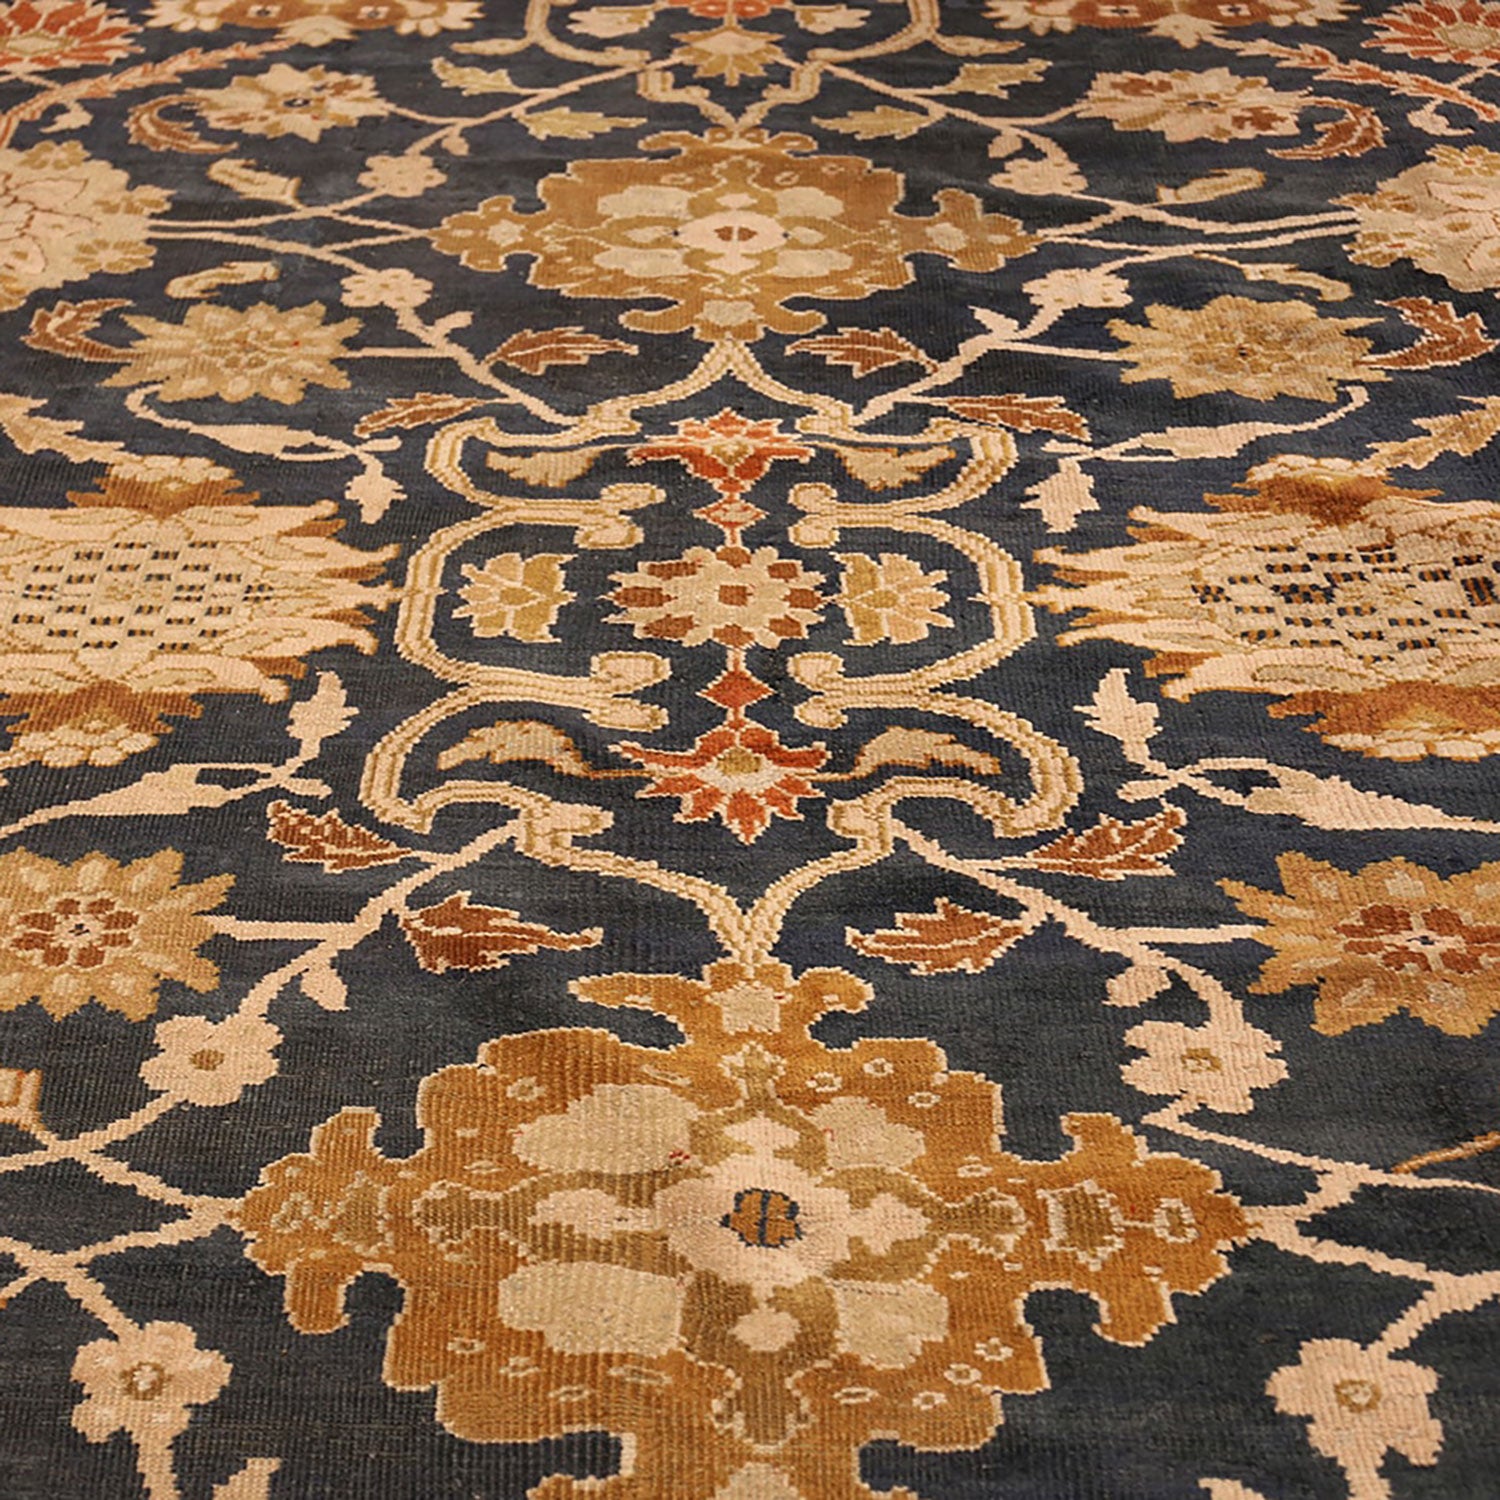 Close-up view of a Persian-style rug with intricate floral patterns.